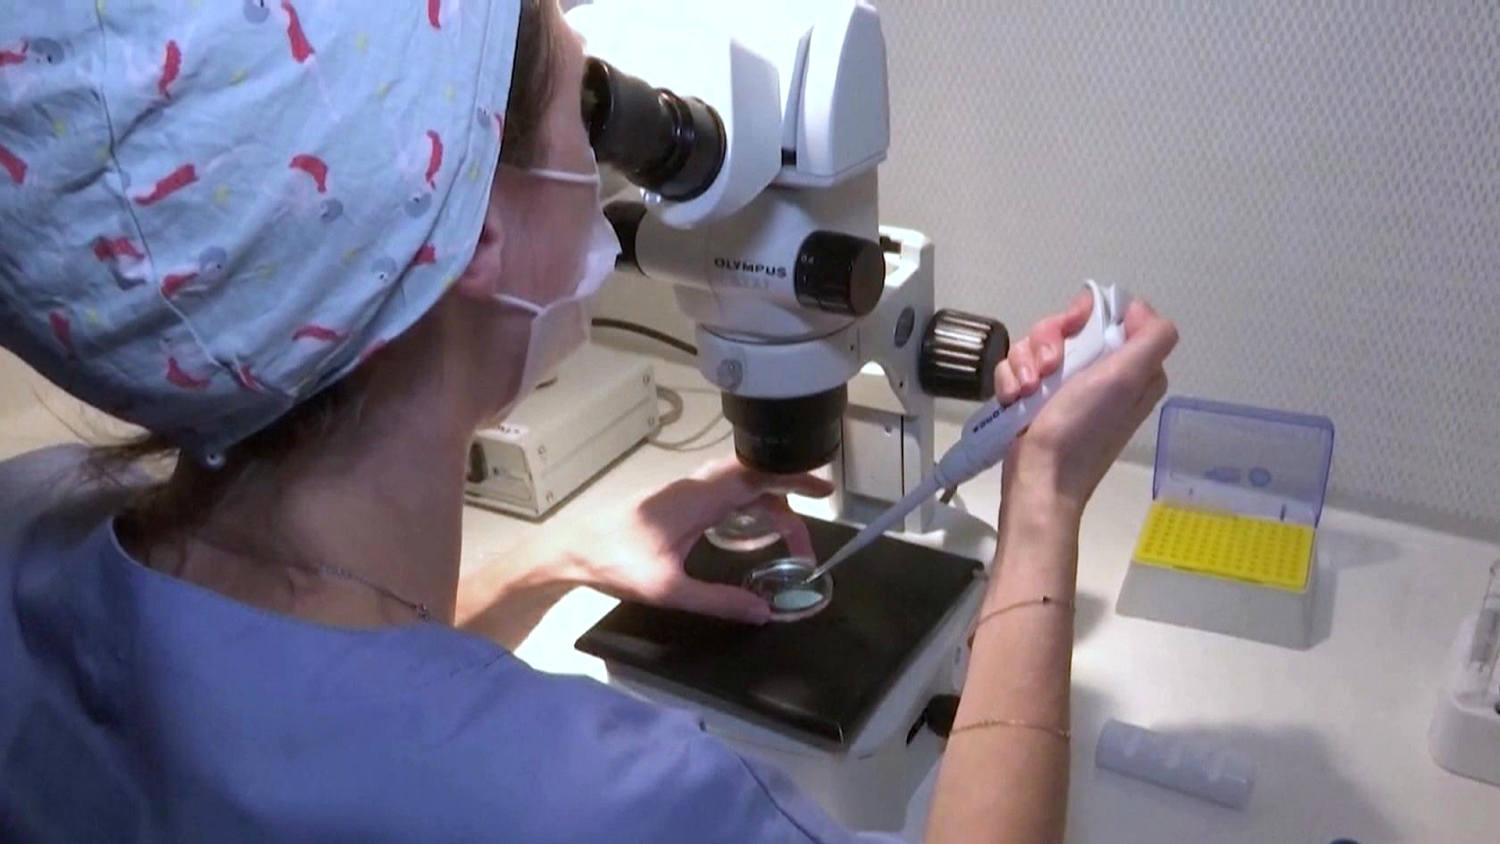 More clinics in Alabama stop IVF treatments after court ruling